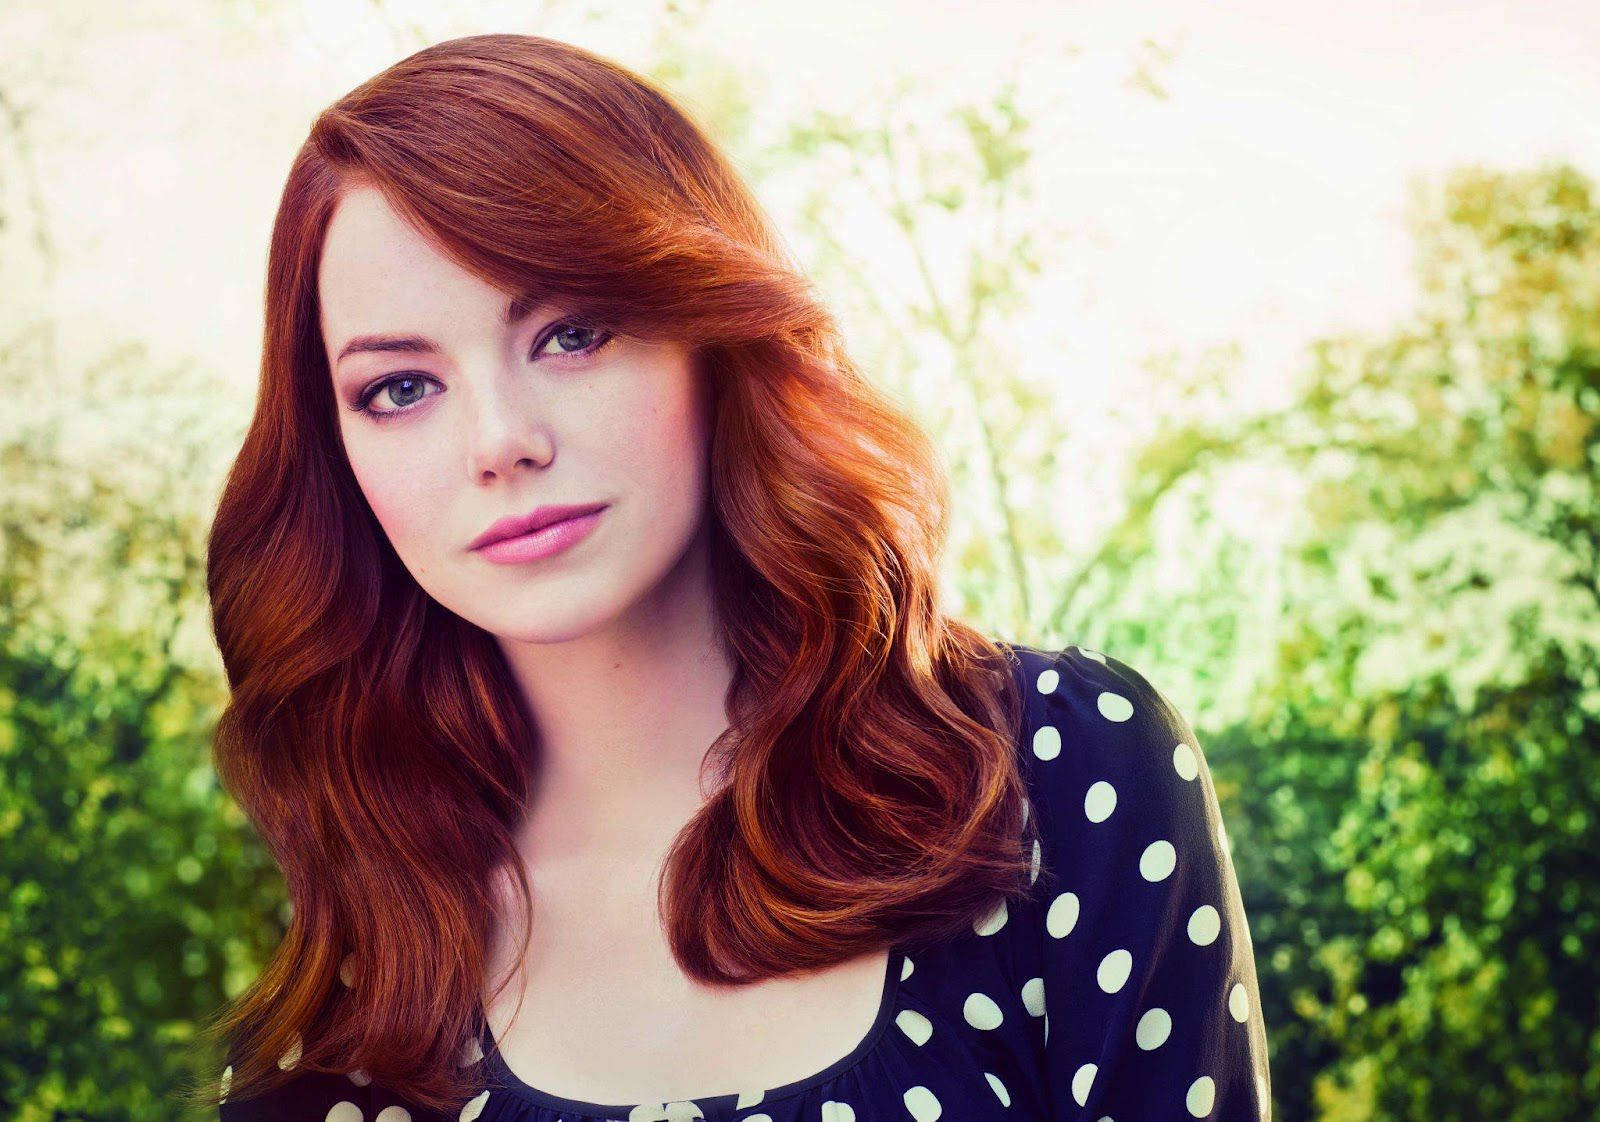 Emma Stone, A Redhead Girl With A Charismatic Personality. Background